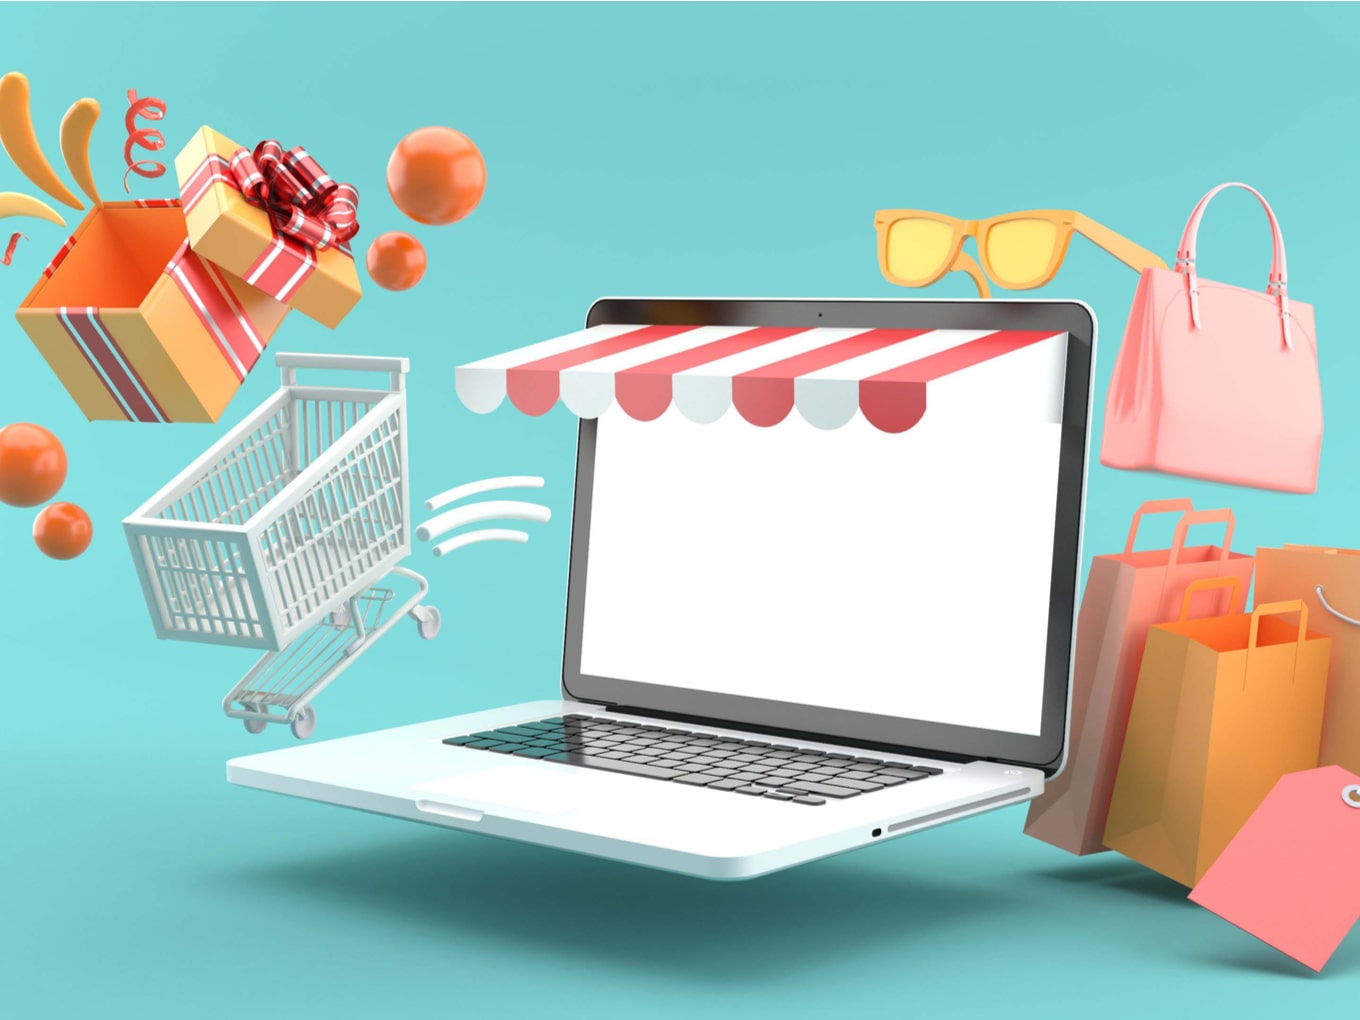 Draft Ecommerce Policy: Ban On Flash Sales, Tighter Related Party Rules And More